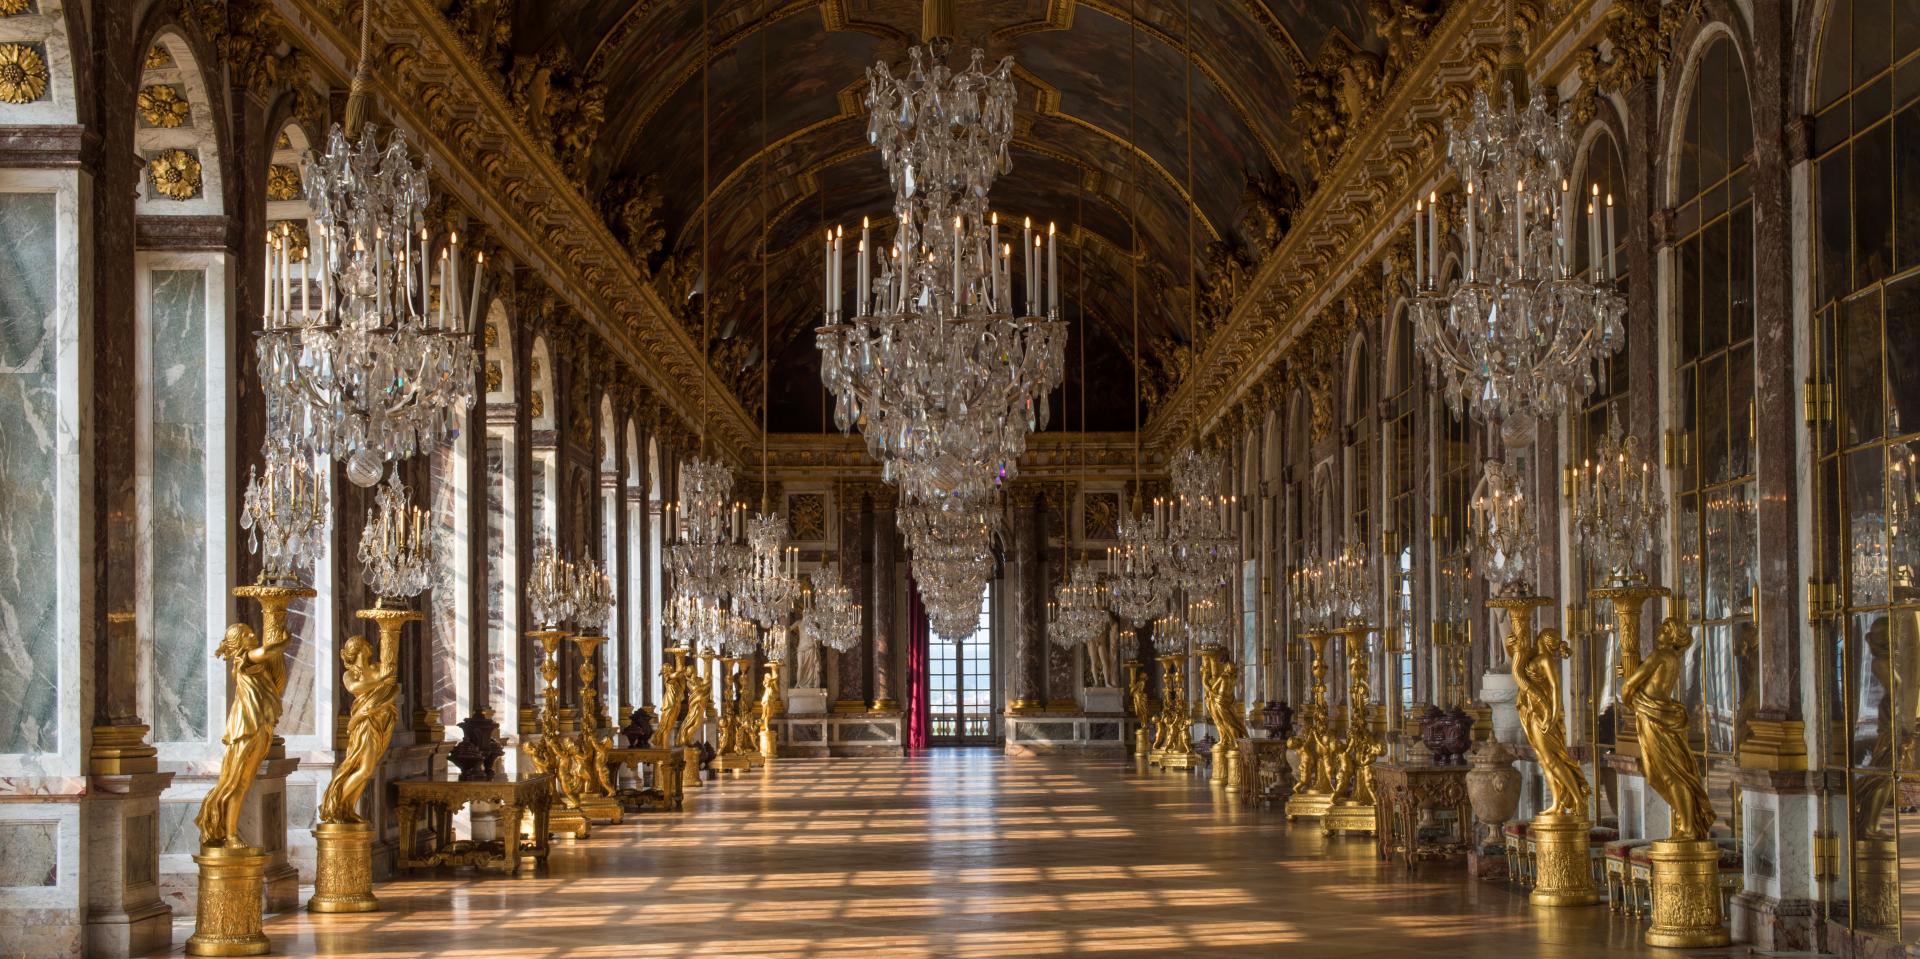 The Hall of Mirror